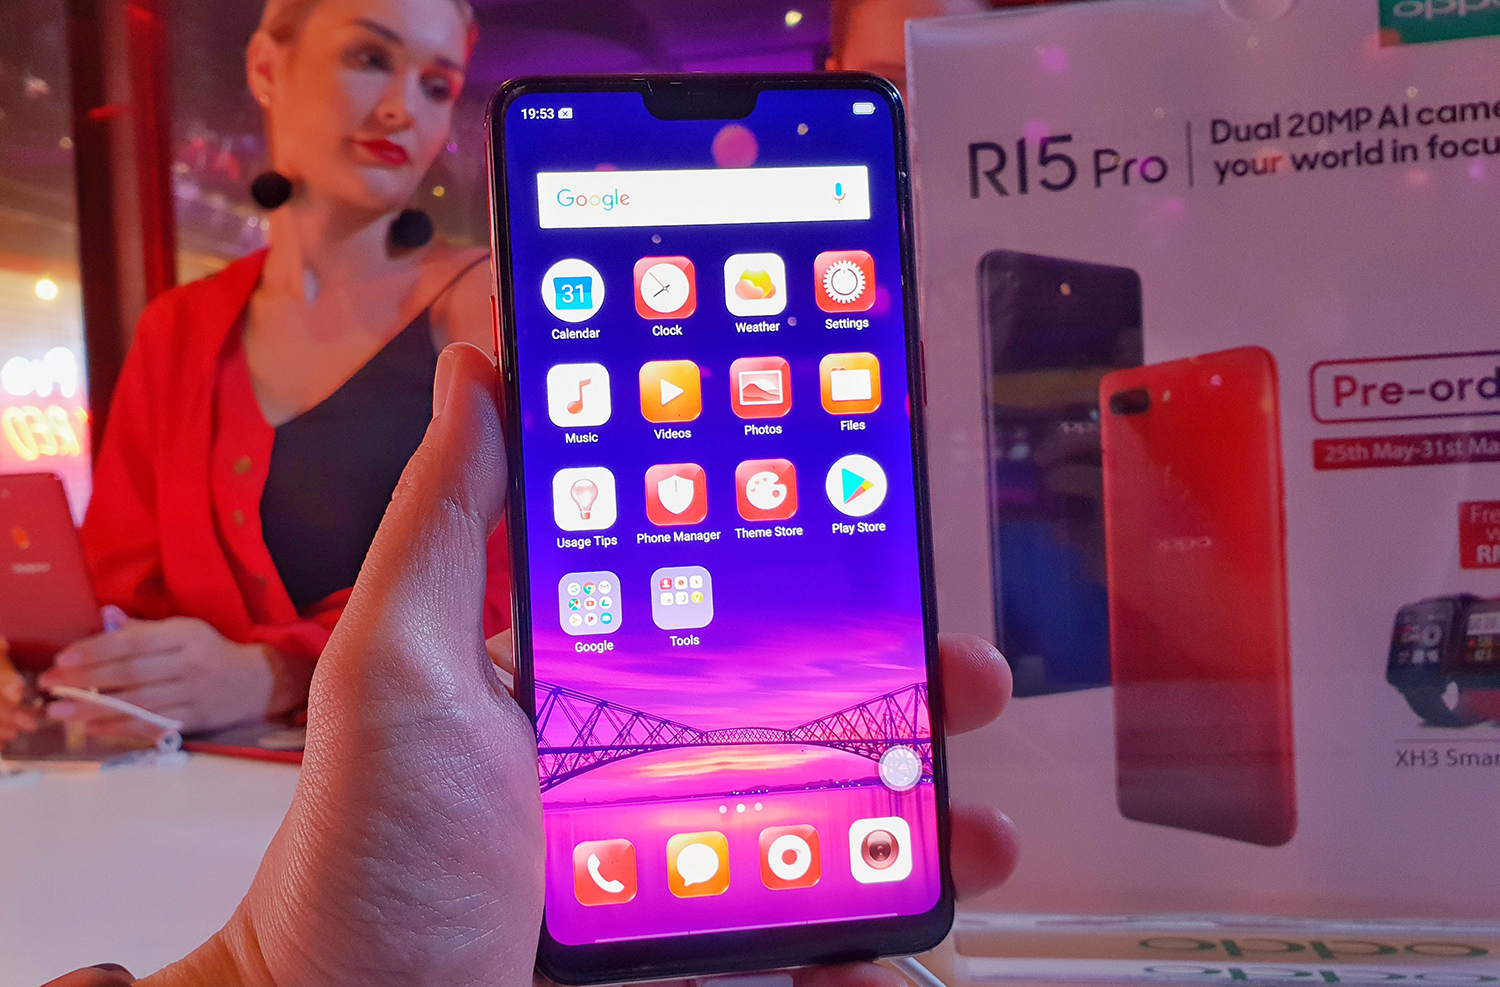 Oppo banks on AI for R15 Pro smartphone